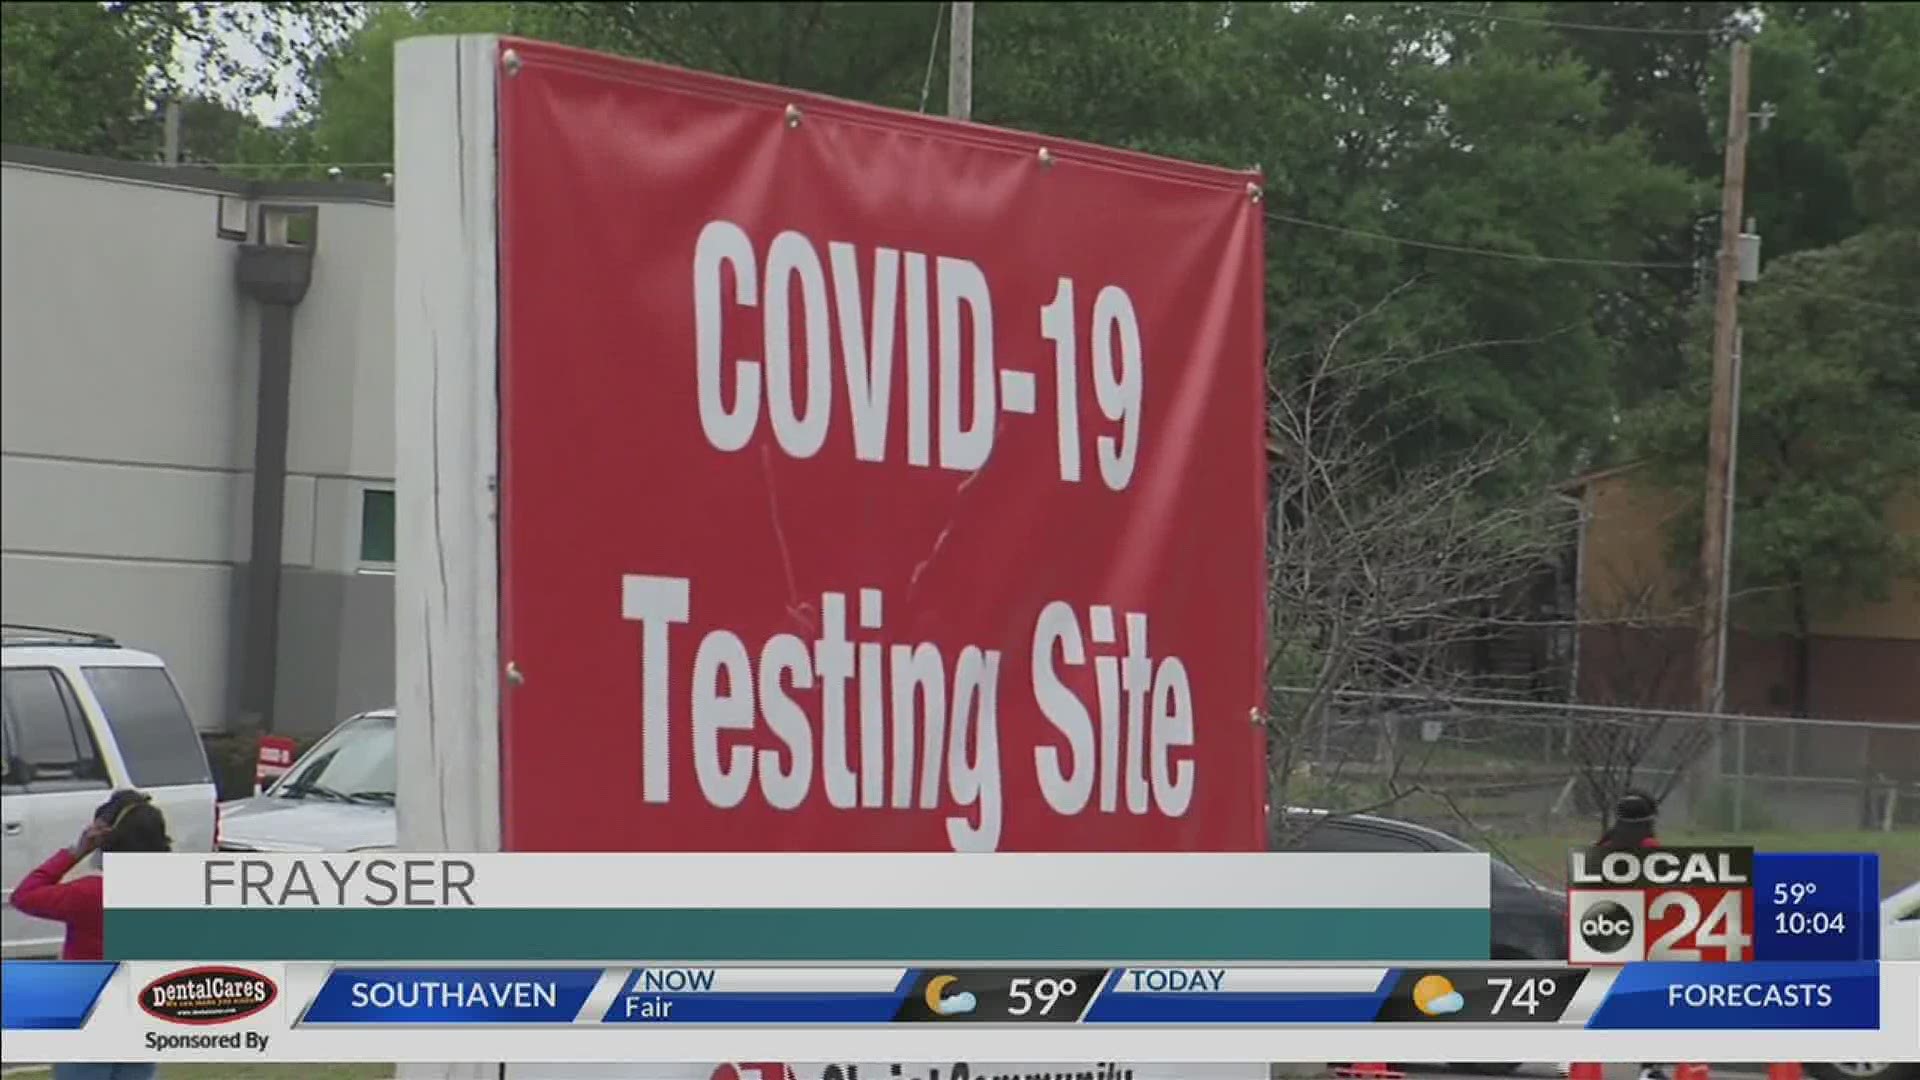 GOVERNOR LEE VISITS COVID-19 TESTING SITE IN FRAYSER SATURDAY